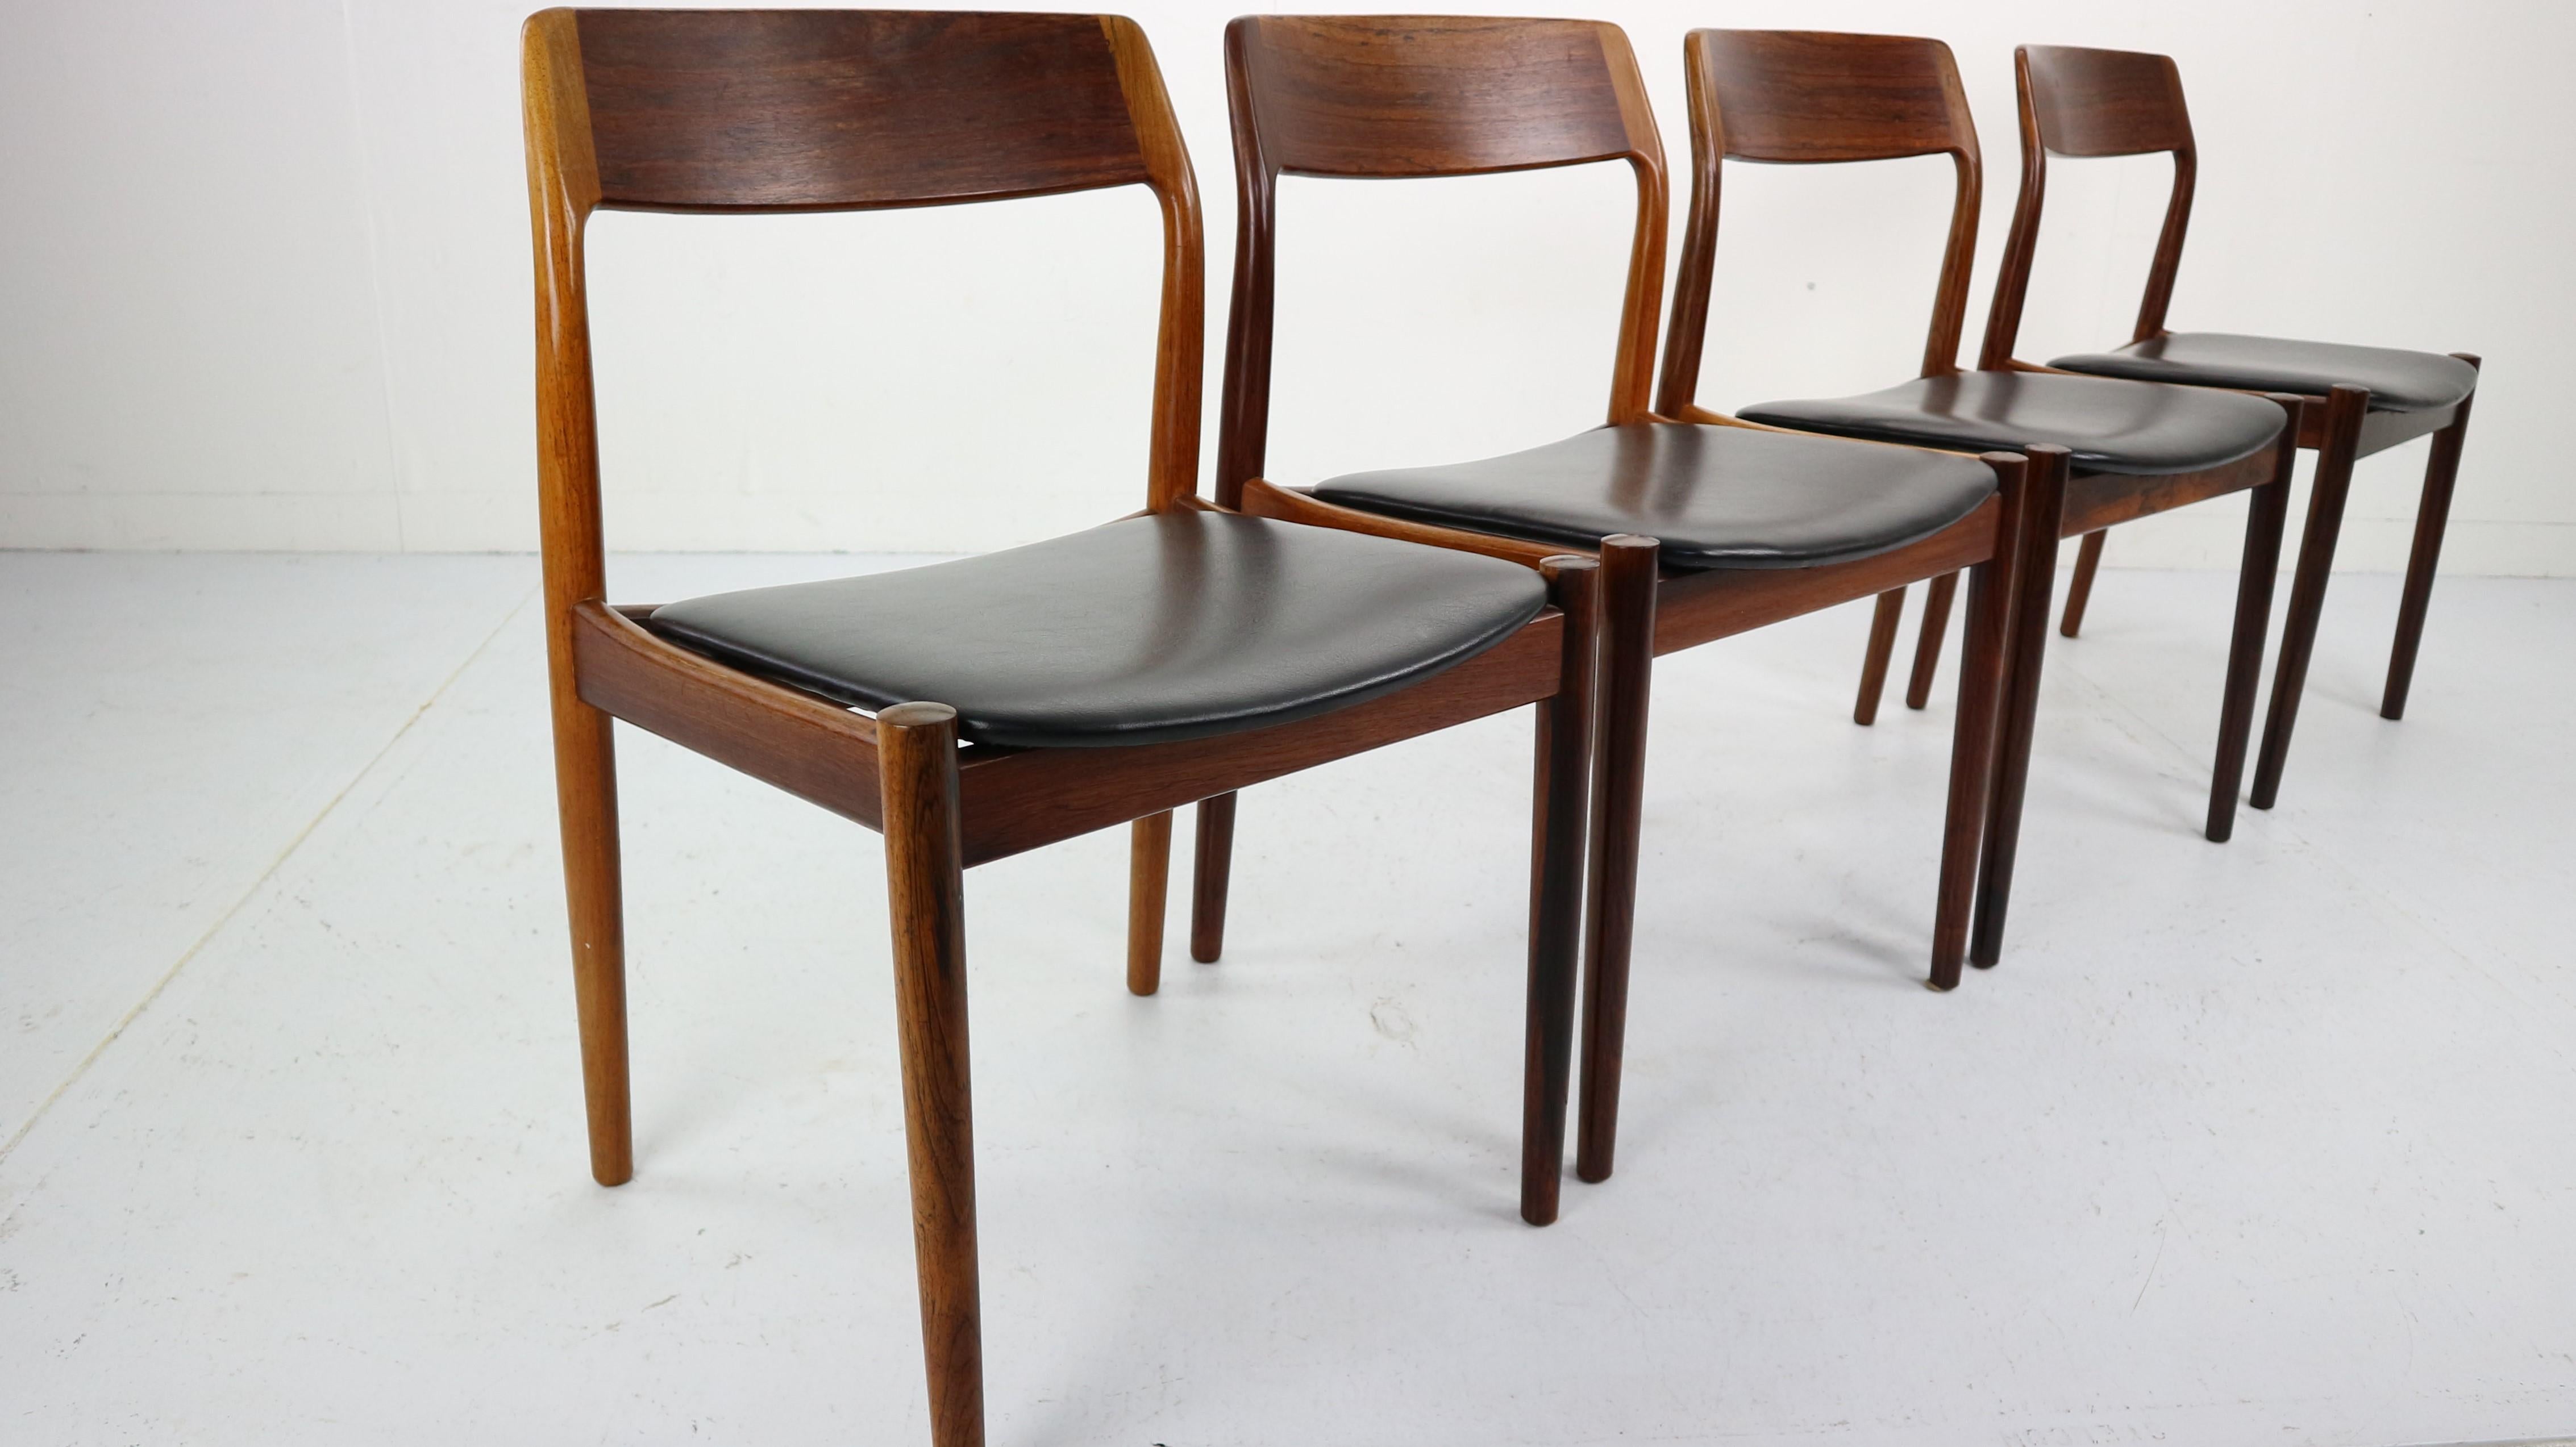 Set of 4 dining room chairs designed by Niels Otto Møller in 1960s, Denmark.
Chairs are made from rosewood frame and black vinyl seating. 
All chairs are originally marked.
 